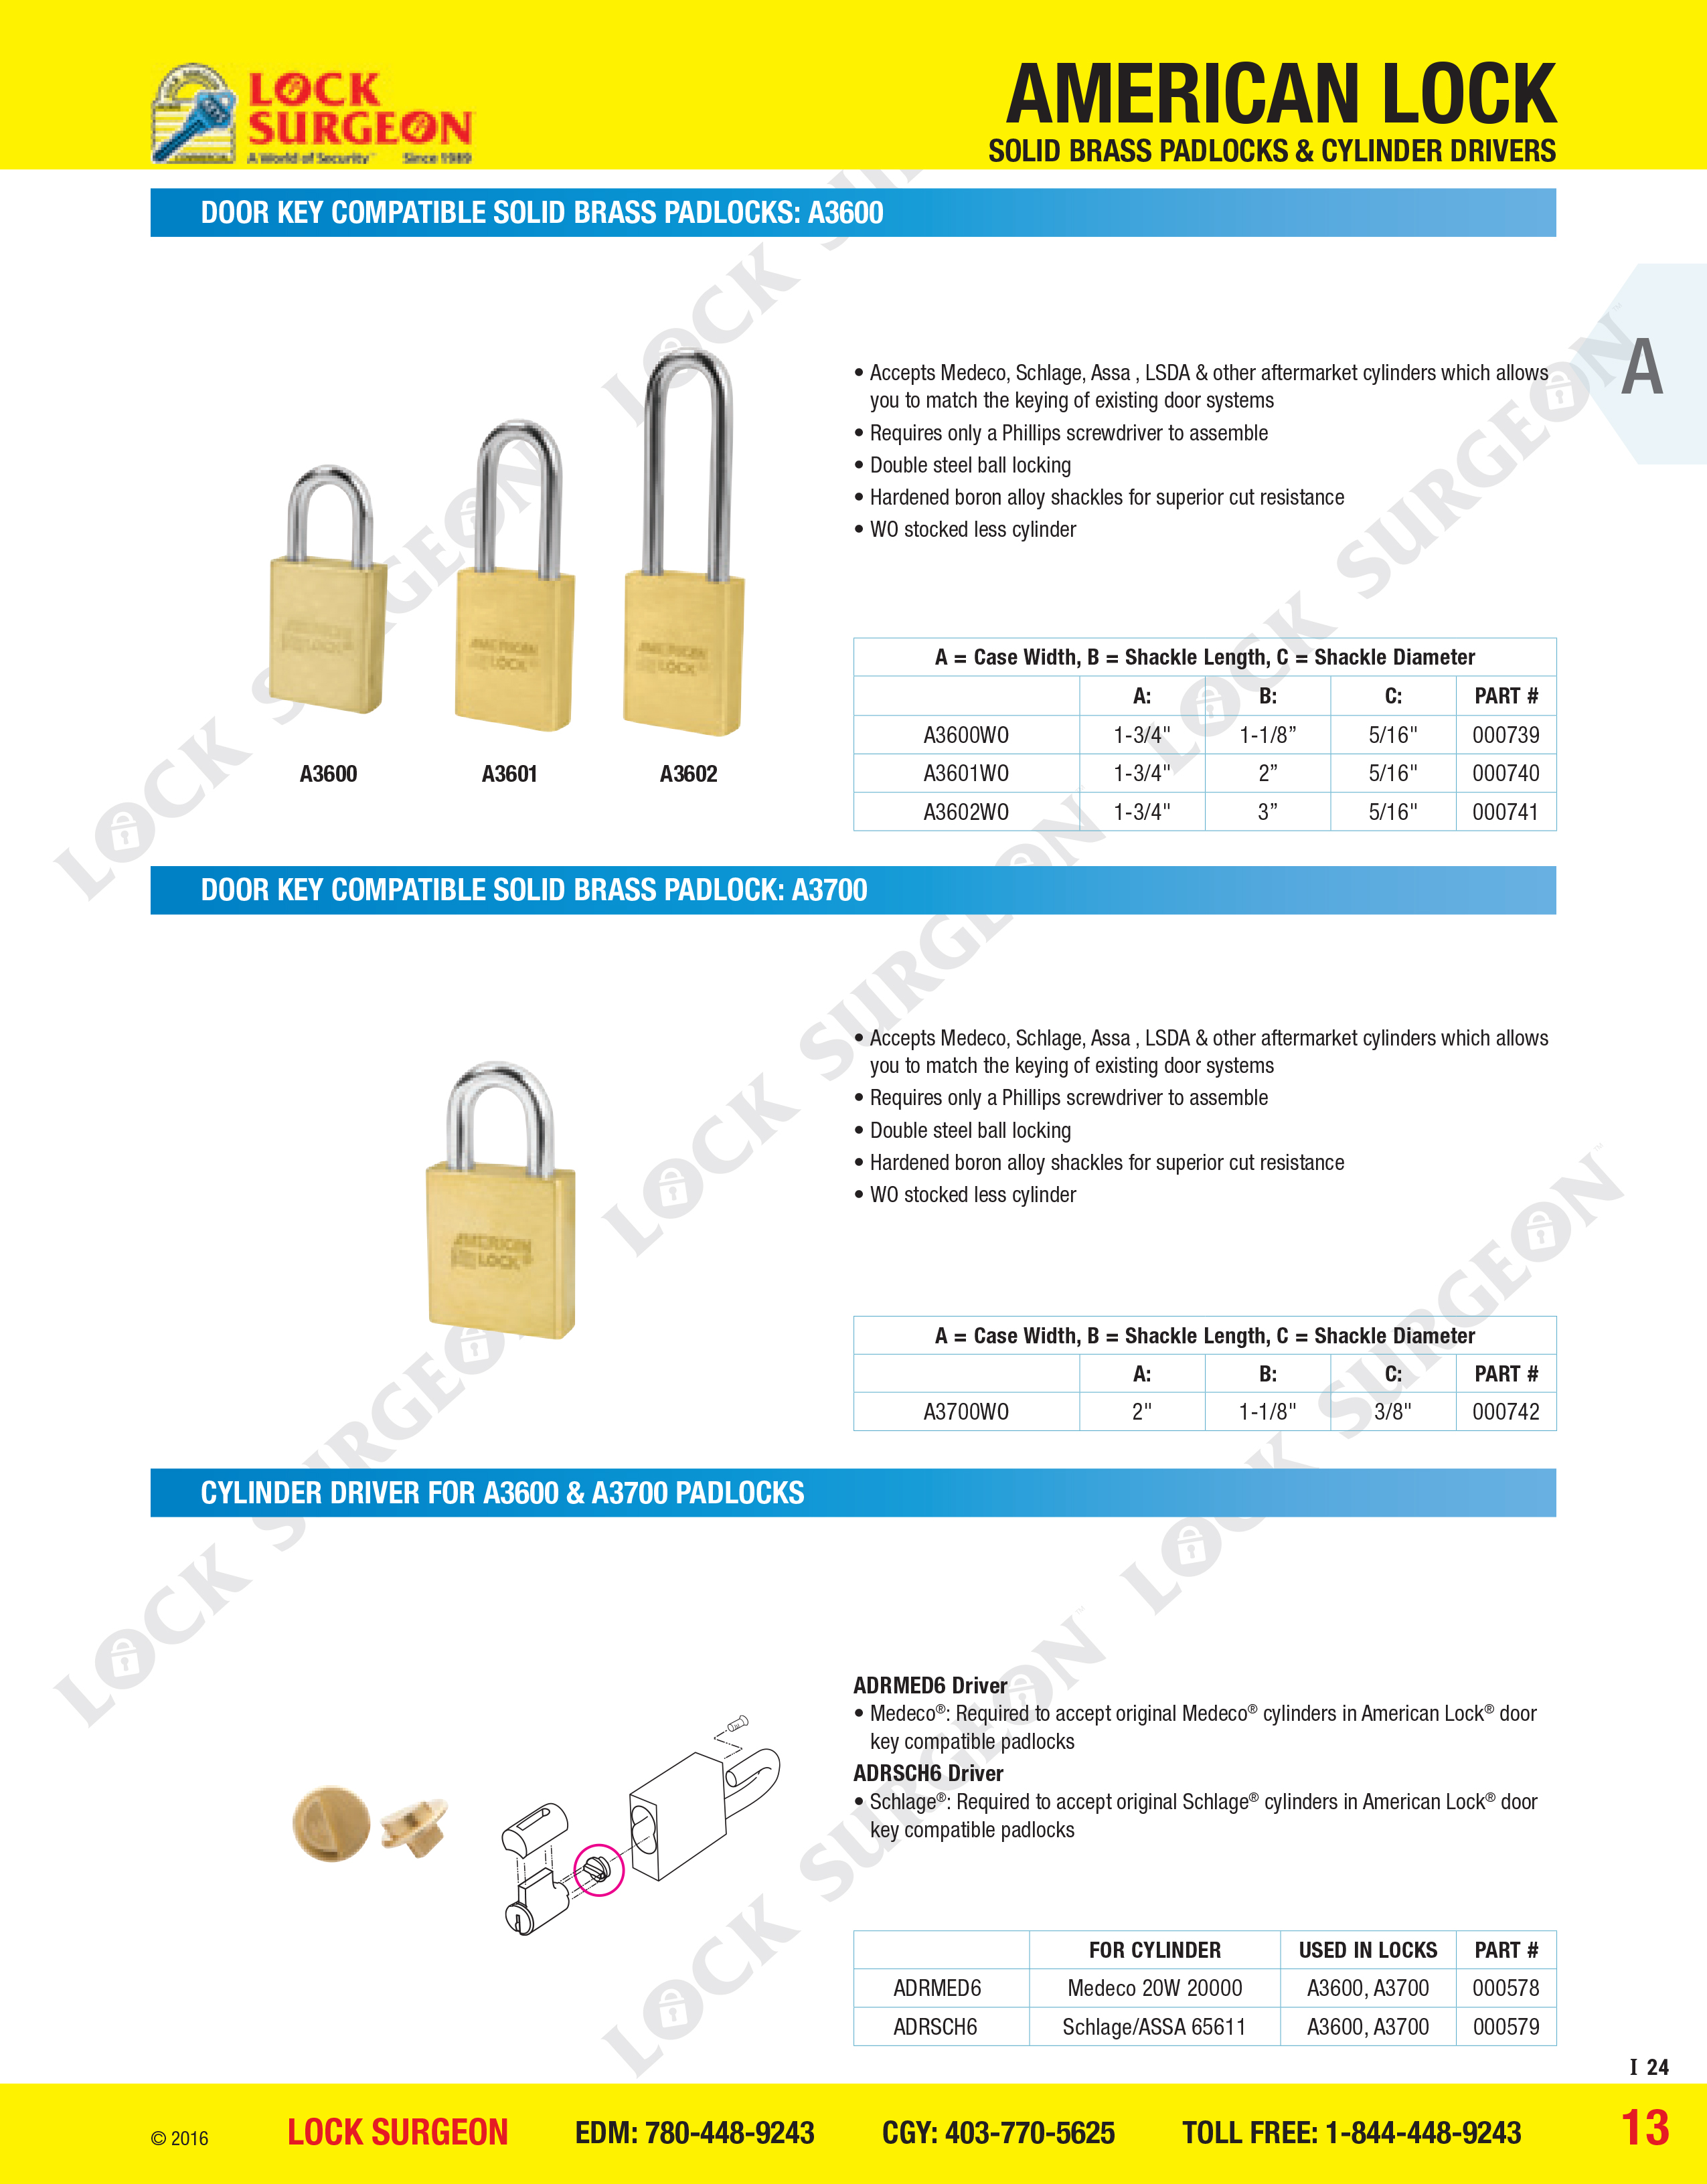 Door key compatible solid brass padlocks: A3600, A3700 Cylider drivers for A3600, A3700 Padlocks.